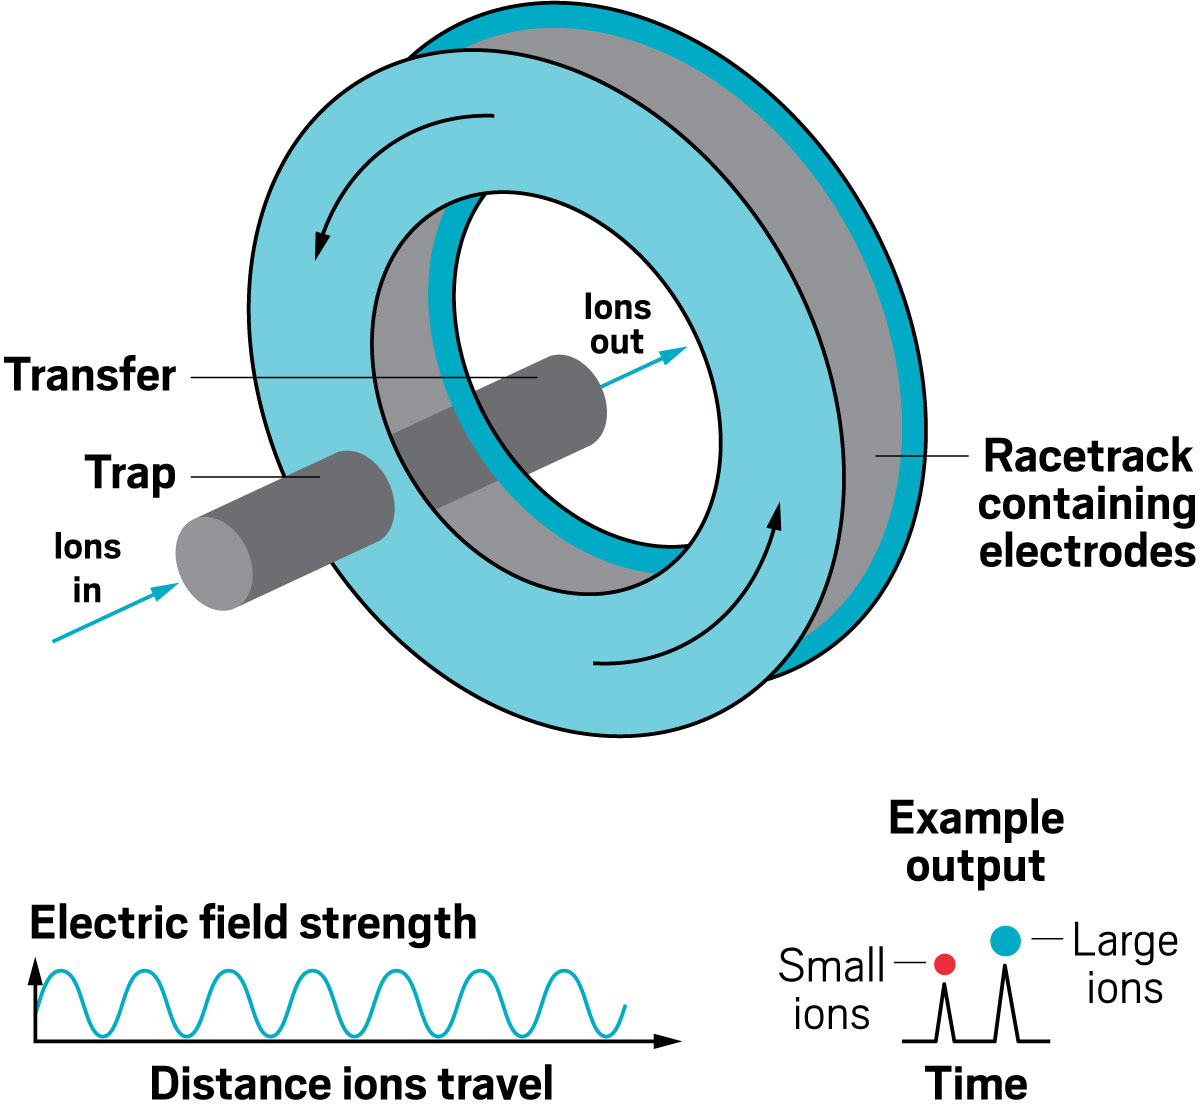 Cyclic ion mobility is a geometric variant of TWIMS in which ions are sent around a racetrack. In this version, a continuously varying electric field is still used to separate ions, but it travels around the racetrack instead of linearly. The device achieves a higher resolving power because it can send ions around the cycle multiple times. Just as with standard traveling wave devices, smaller ions usually elute faster than larger ions. The elution order can change, however, if smaller, faster ions lap larger, slower ions. To remove that possibility, scientists can selectively inject small groups of mass-selected ions into the racetrack, or they can selectively eject from the cyclic device ions that are outside the mobility range of interest.